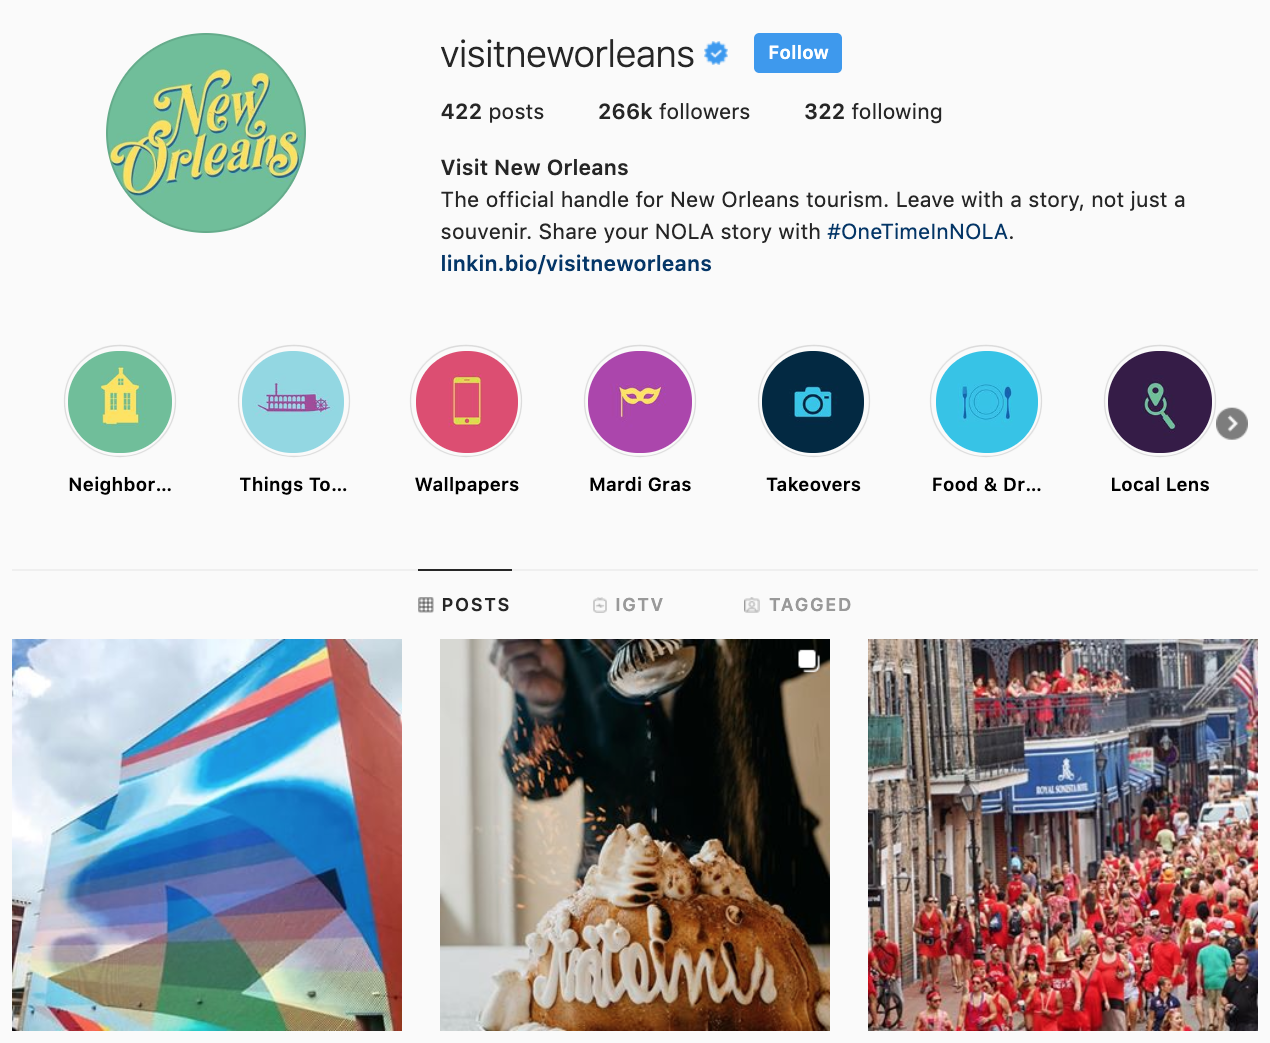 Visit New Orleans offers a perfect local example of Instagram Highlights for businesses that use icons as cover photos.